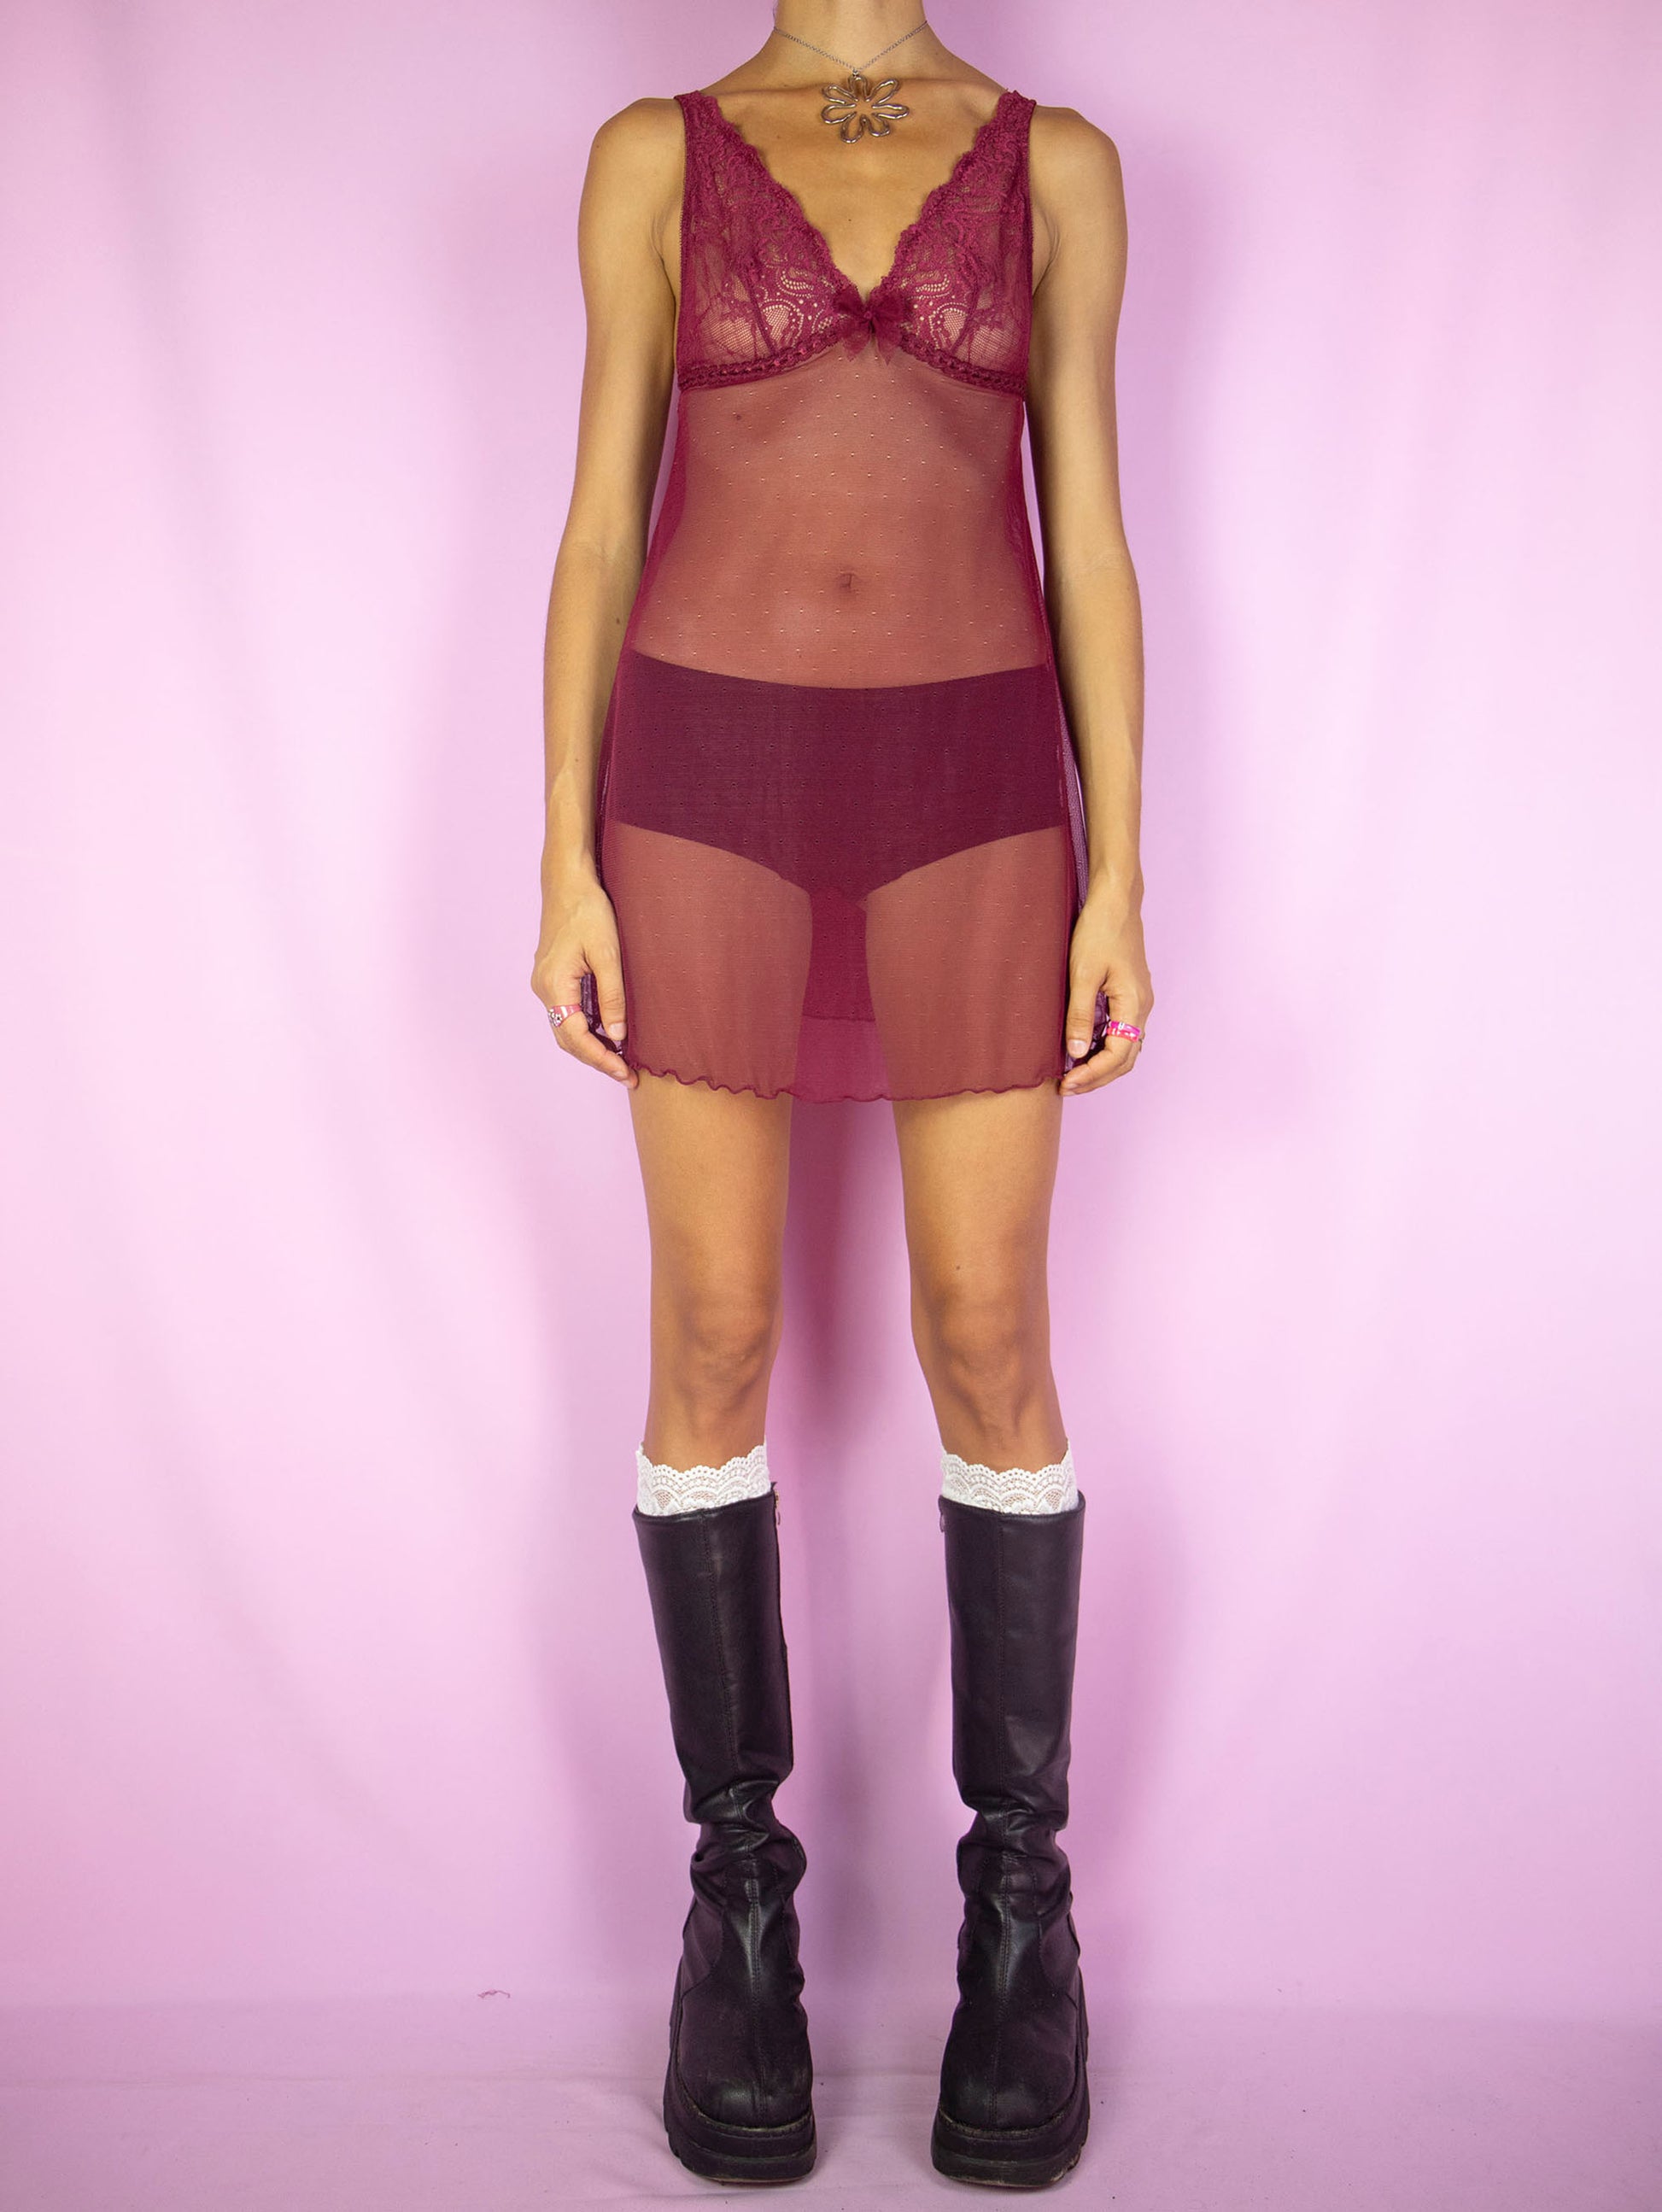 The Y2K Maroon Mesh Slip Dress is a vintage burgundy red mini cami dress made of semi-sheer mesh and lace with adjustable straps. Romantic sexy coquette 2000s lingerie night dress.